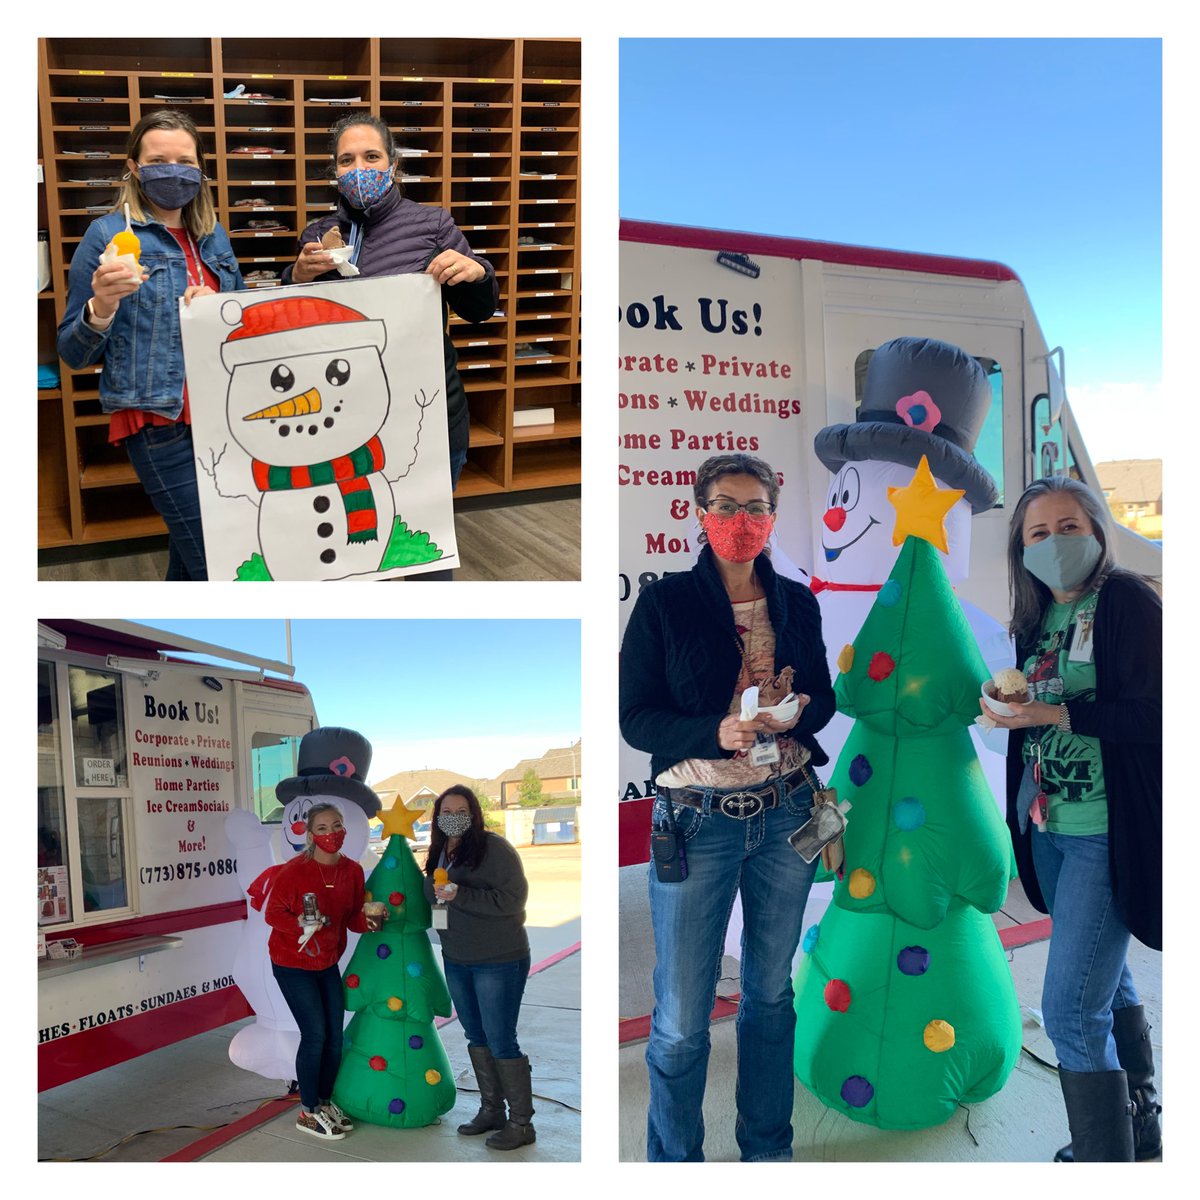 Thankful for our sponsors and SweetRide! Houston for the cool treat! @MJEjags #mje12days #12DaysOfChristmas